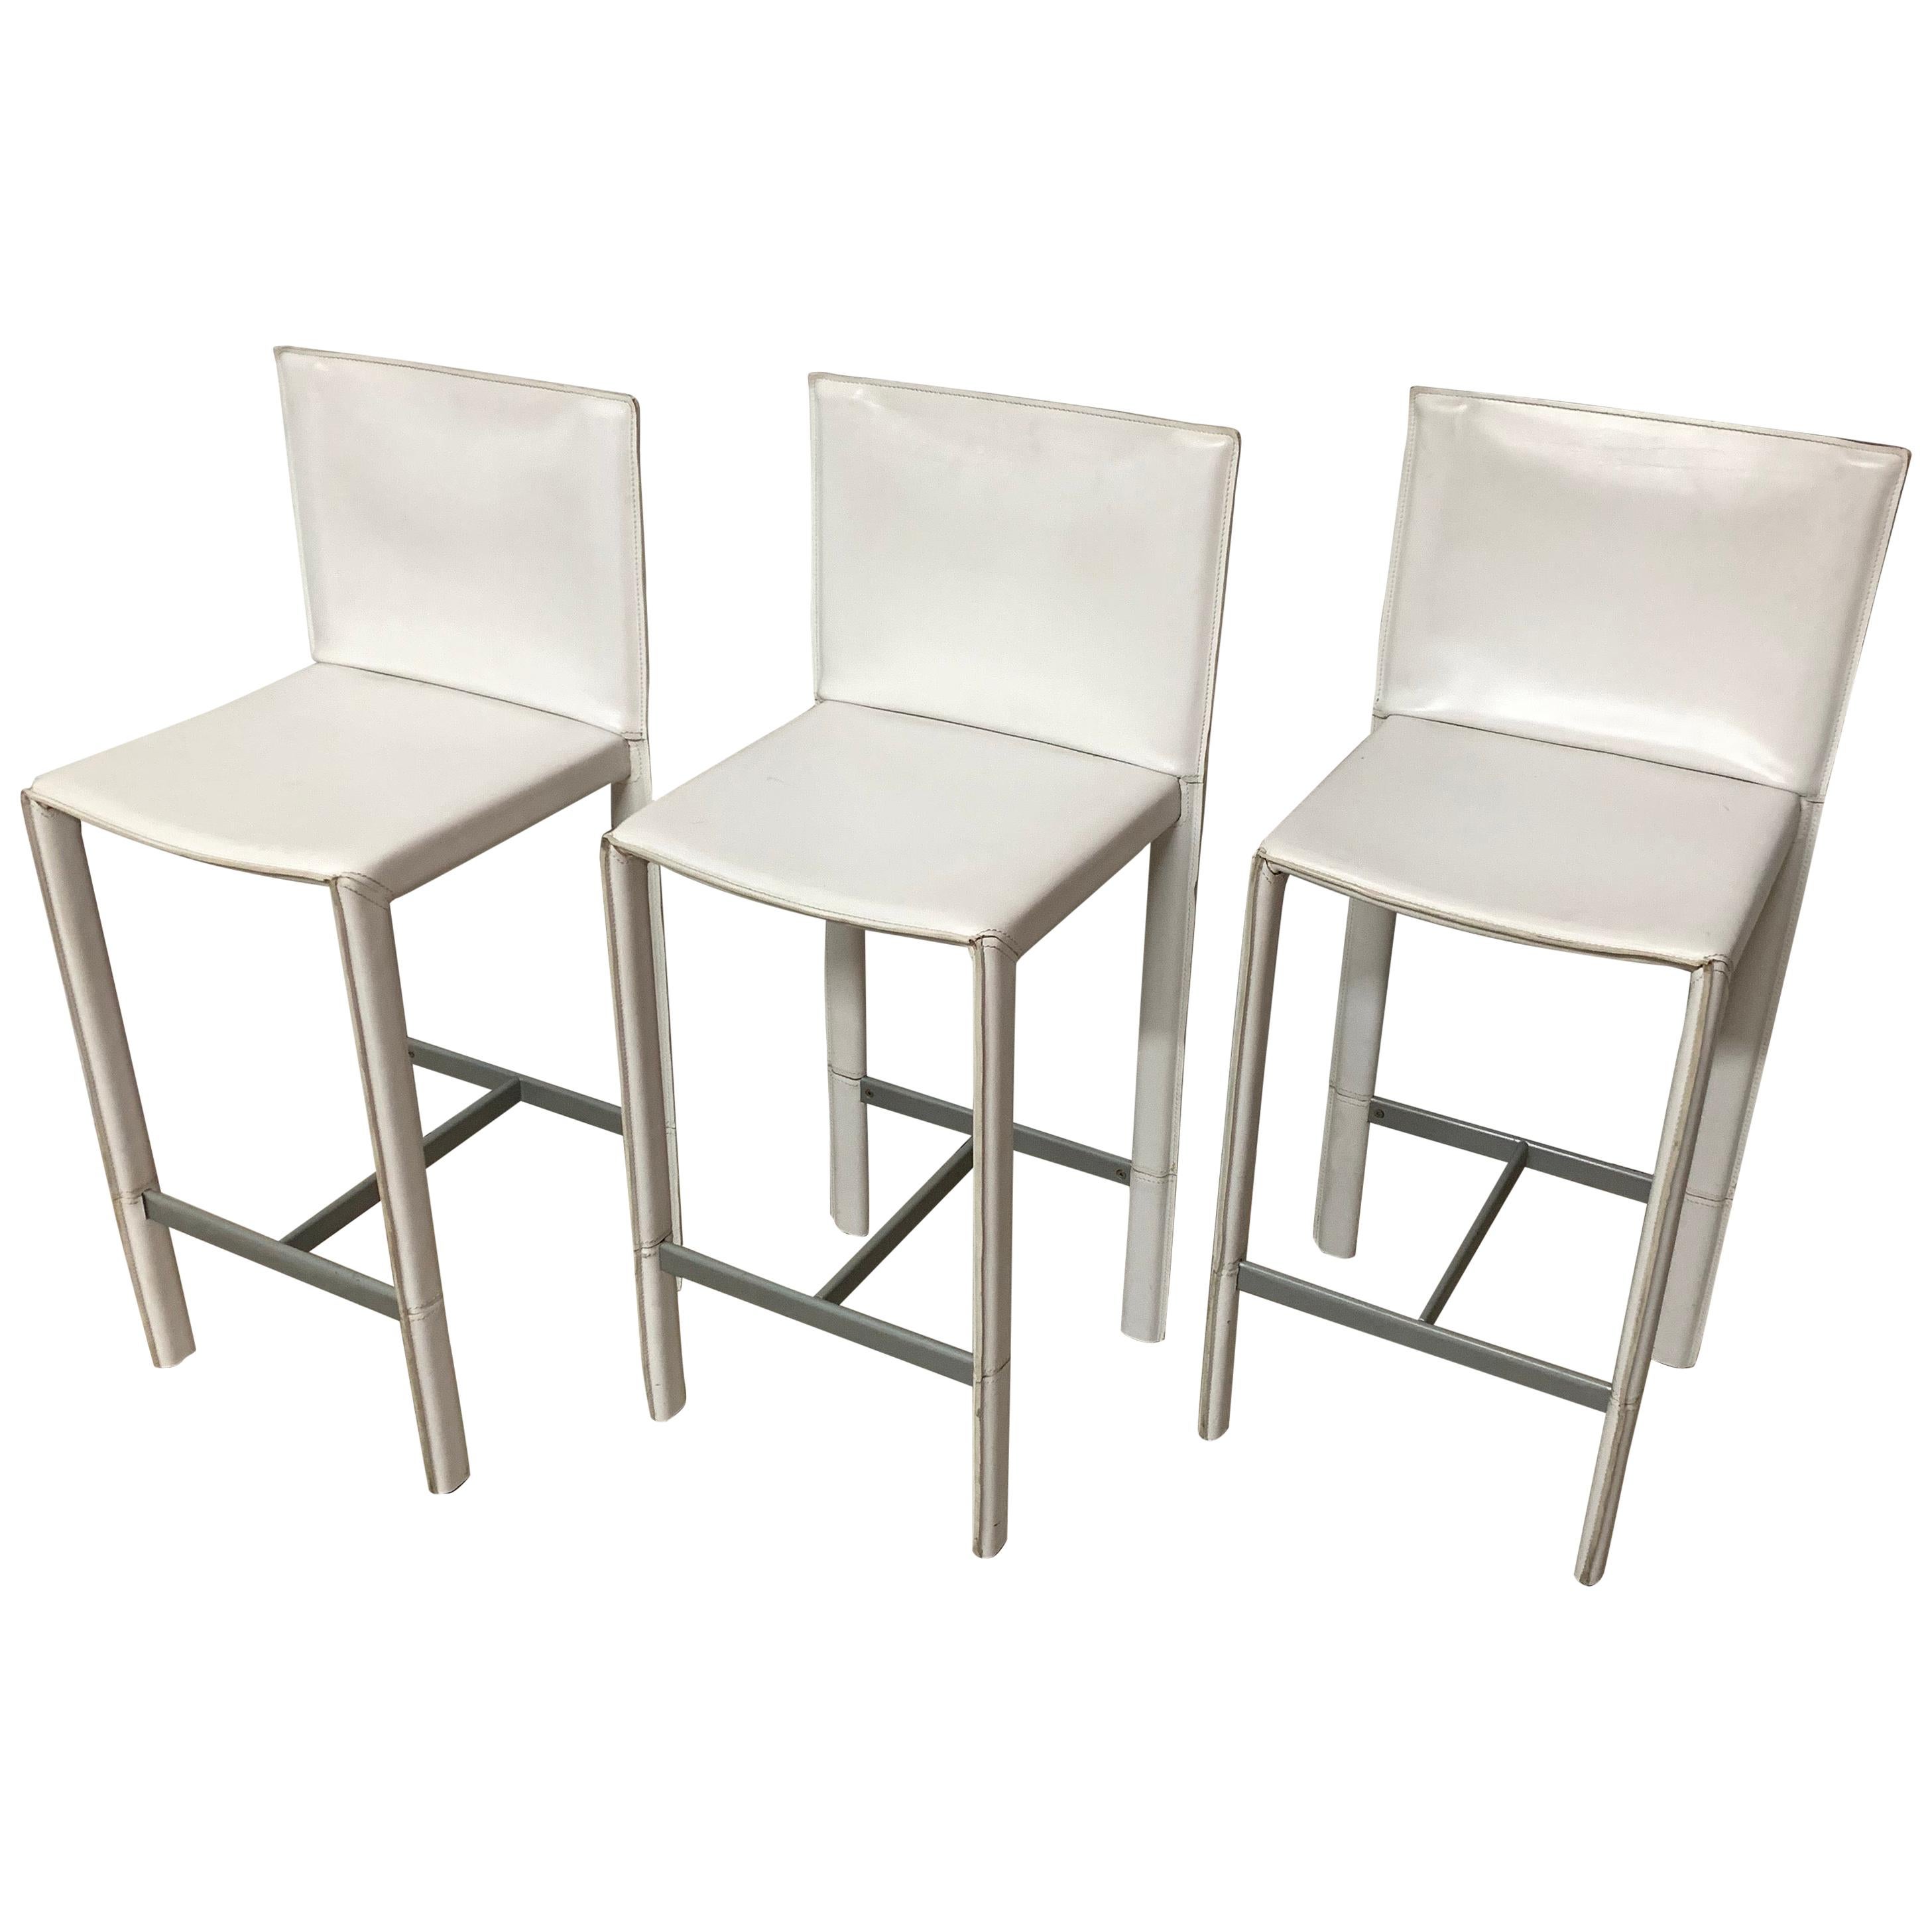 Set of Three Grazzi and Bianchi Stitched Leather Barstools for Enrico Pellizzoni For Sale